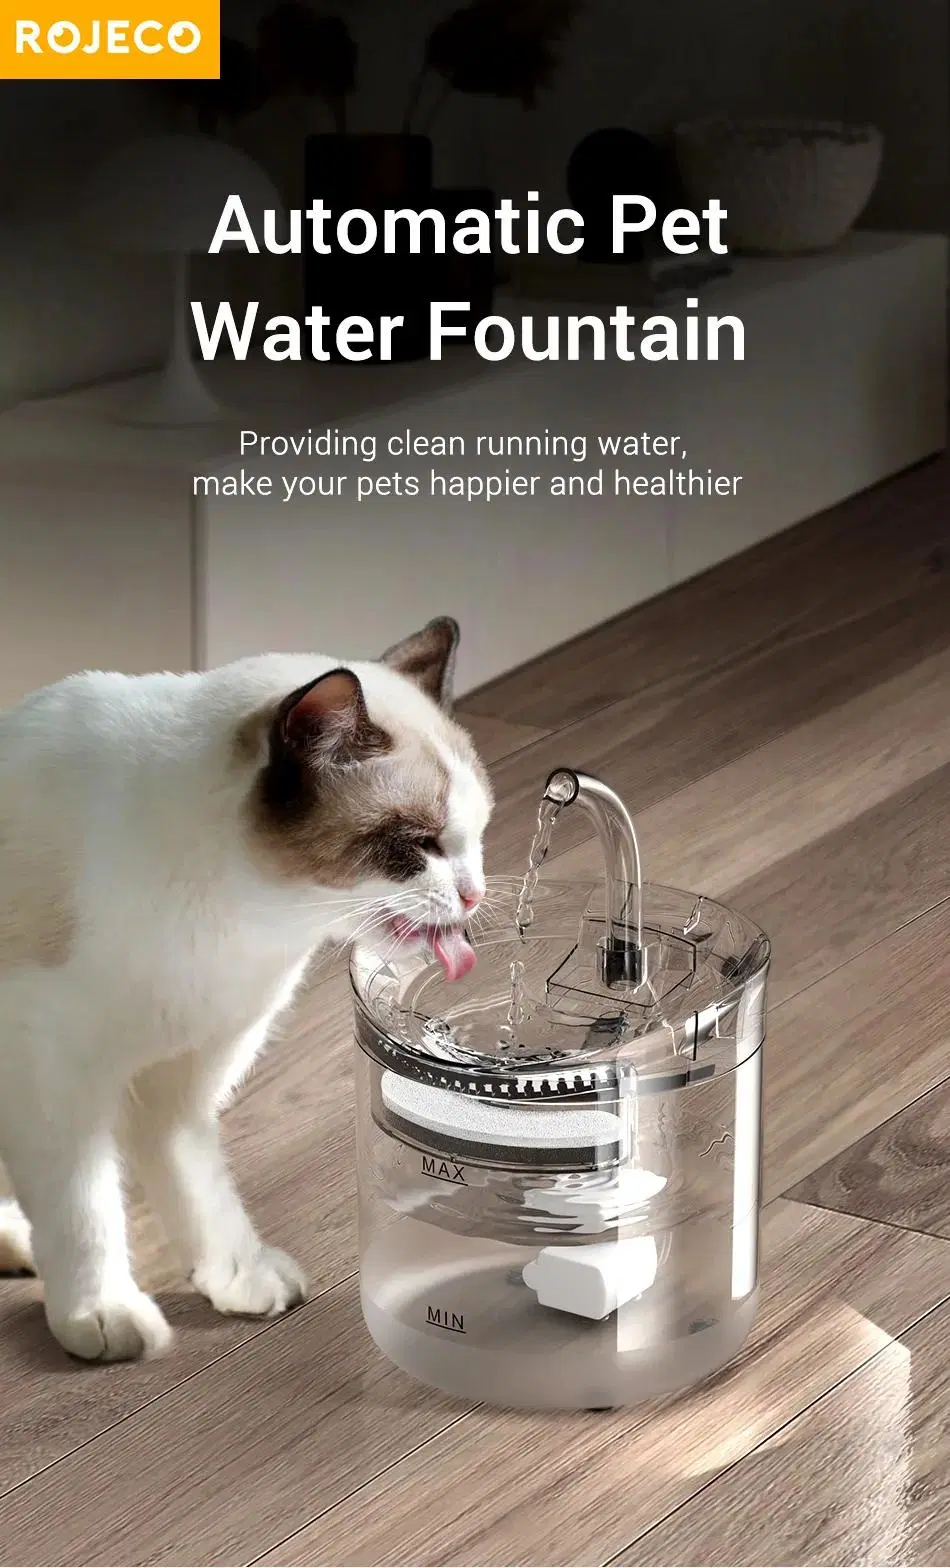 Small But Smart 2L Infrared Inductive Cat Pet Water Dispenser 5V Rechargeable 5000mAh Last for up to 730hrs